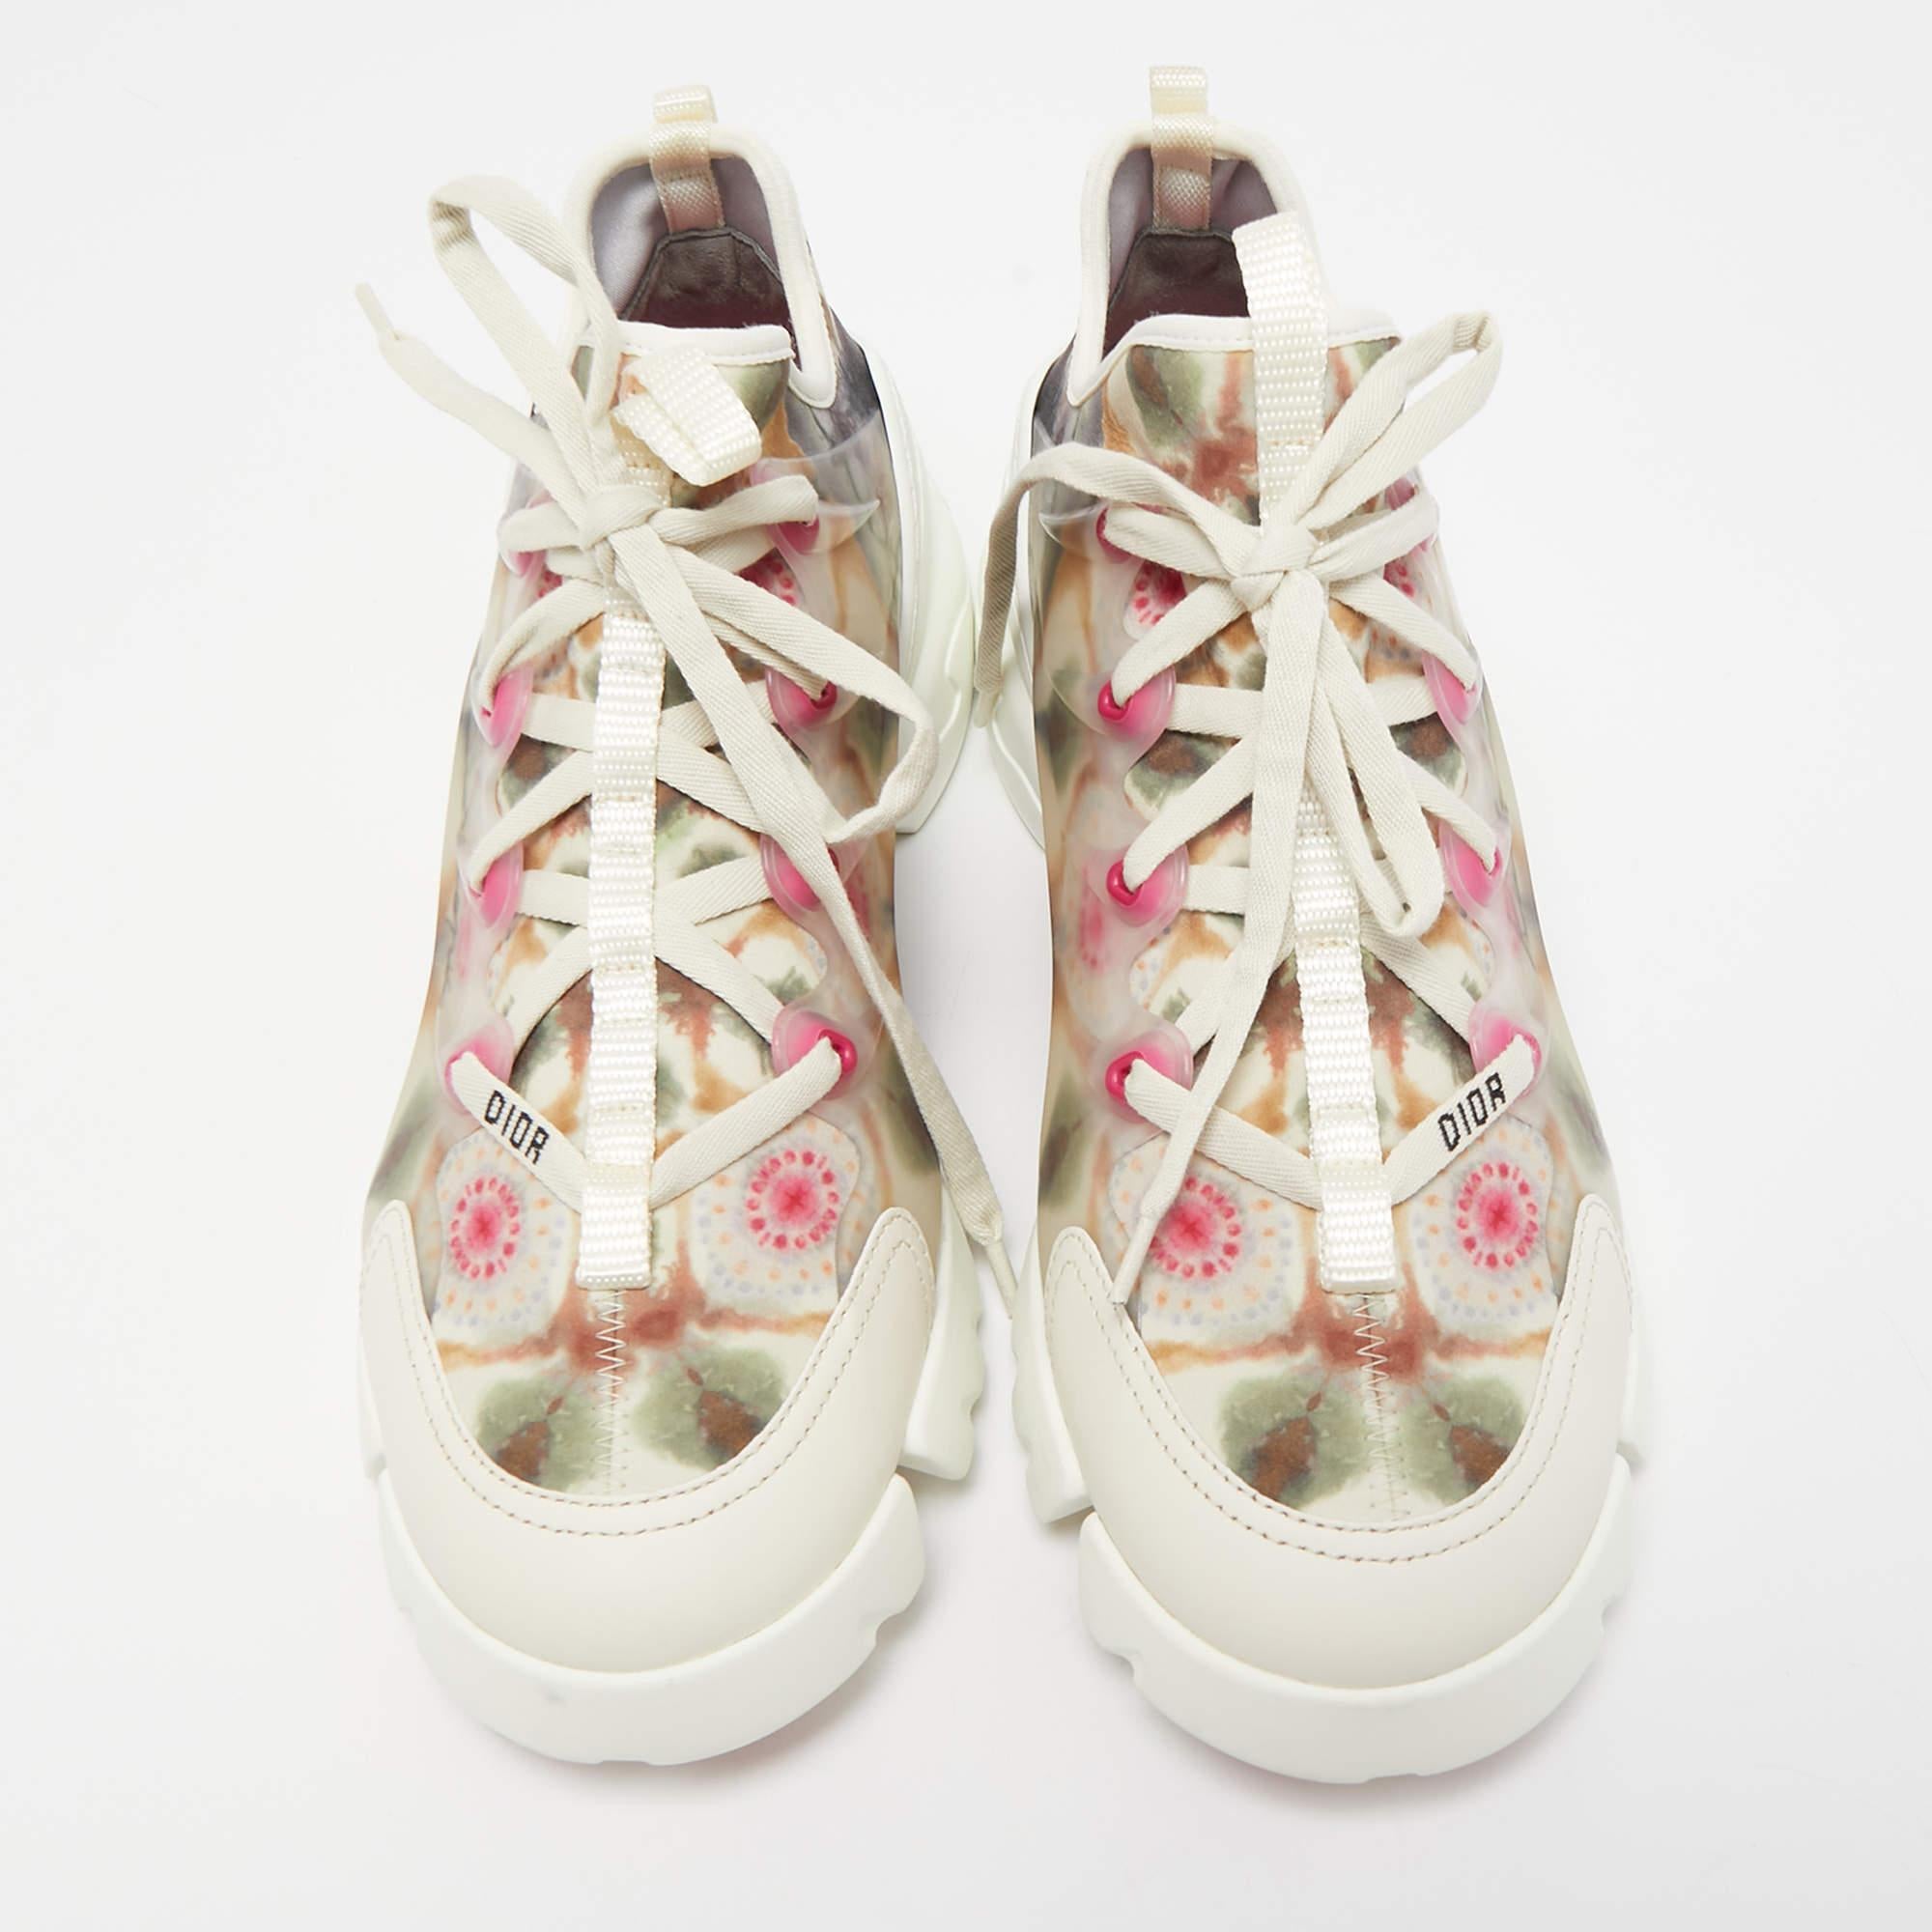 A great pick to elevate your street-style look, these trendy D-Connect sneakers from Dior feature an exterior made of neoprene, and leather into a chunky design with well-carved soles. While the brand name on the laces and counters adds a signature